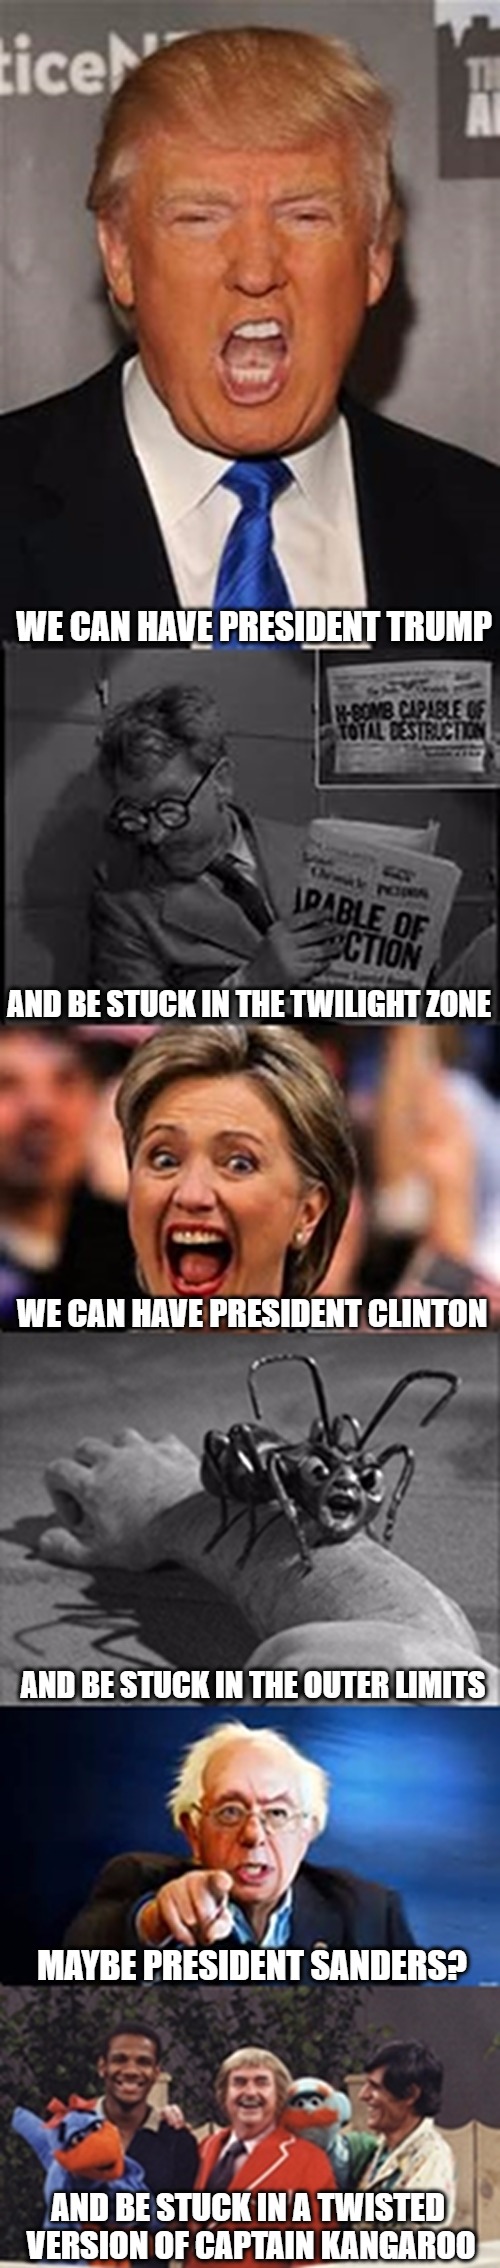 WE CAN HAVE PRESIDENT TRUMP; AND BE STUCK IN THE TWILIGHT ZONE; WE CAN HAVE PRESIDENT CLINTON; AND BE STUCK IN THE OUTER LIMITS; MAYBE PRESIDENT SANDERS? AND BE STUCK IN A TWISTED VERSION OF CAPTAIN KANGAROO | image tagged in the future of america | made w/ Imgflip meme maker